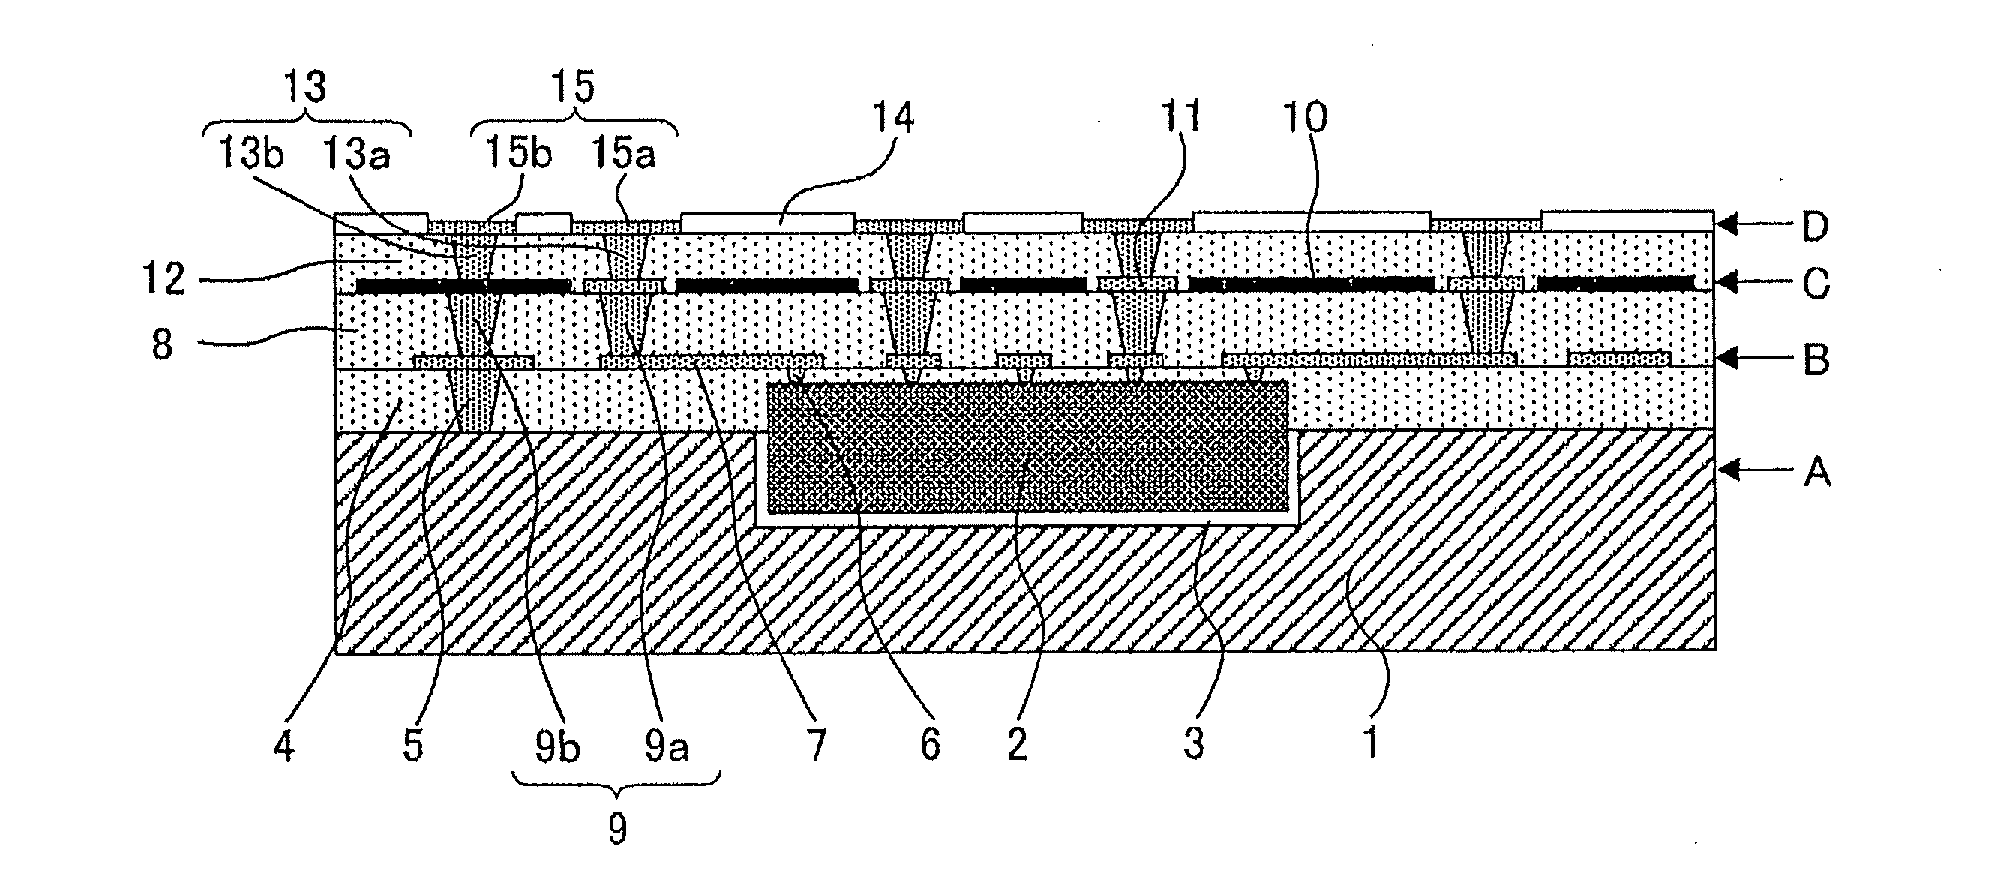 Substrate with built-in functional element